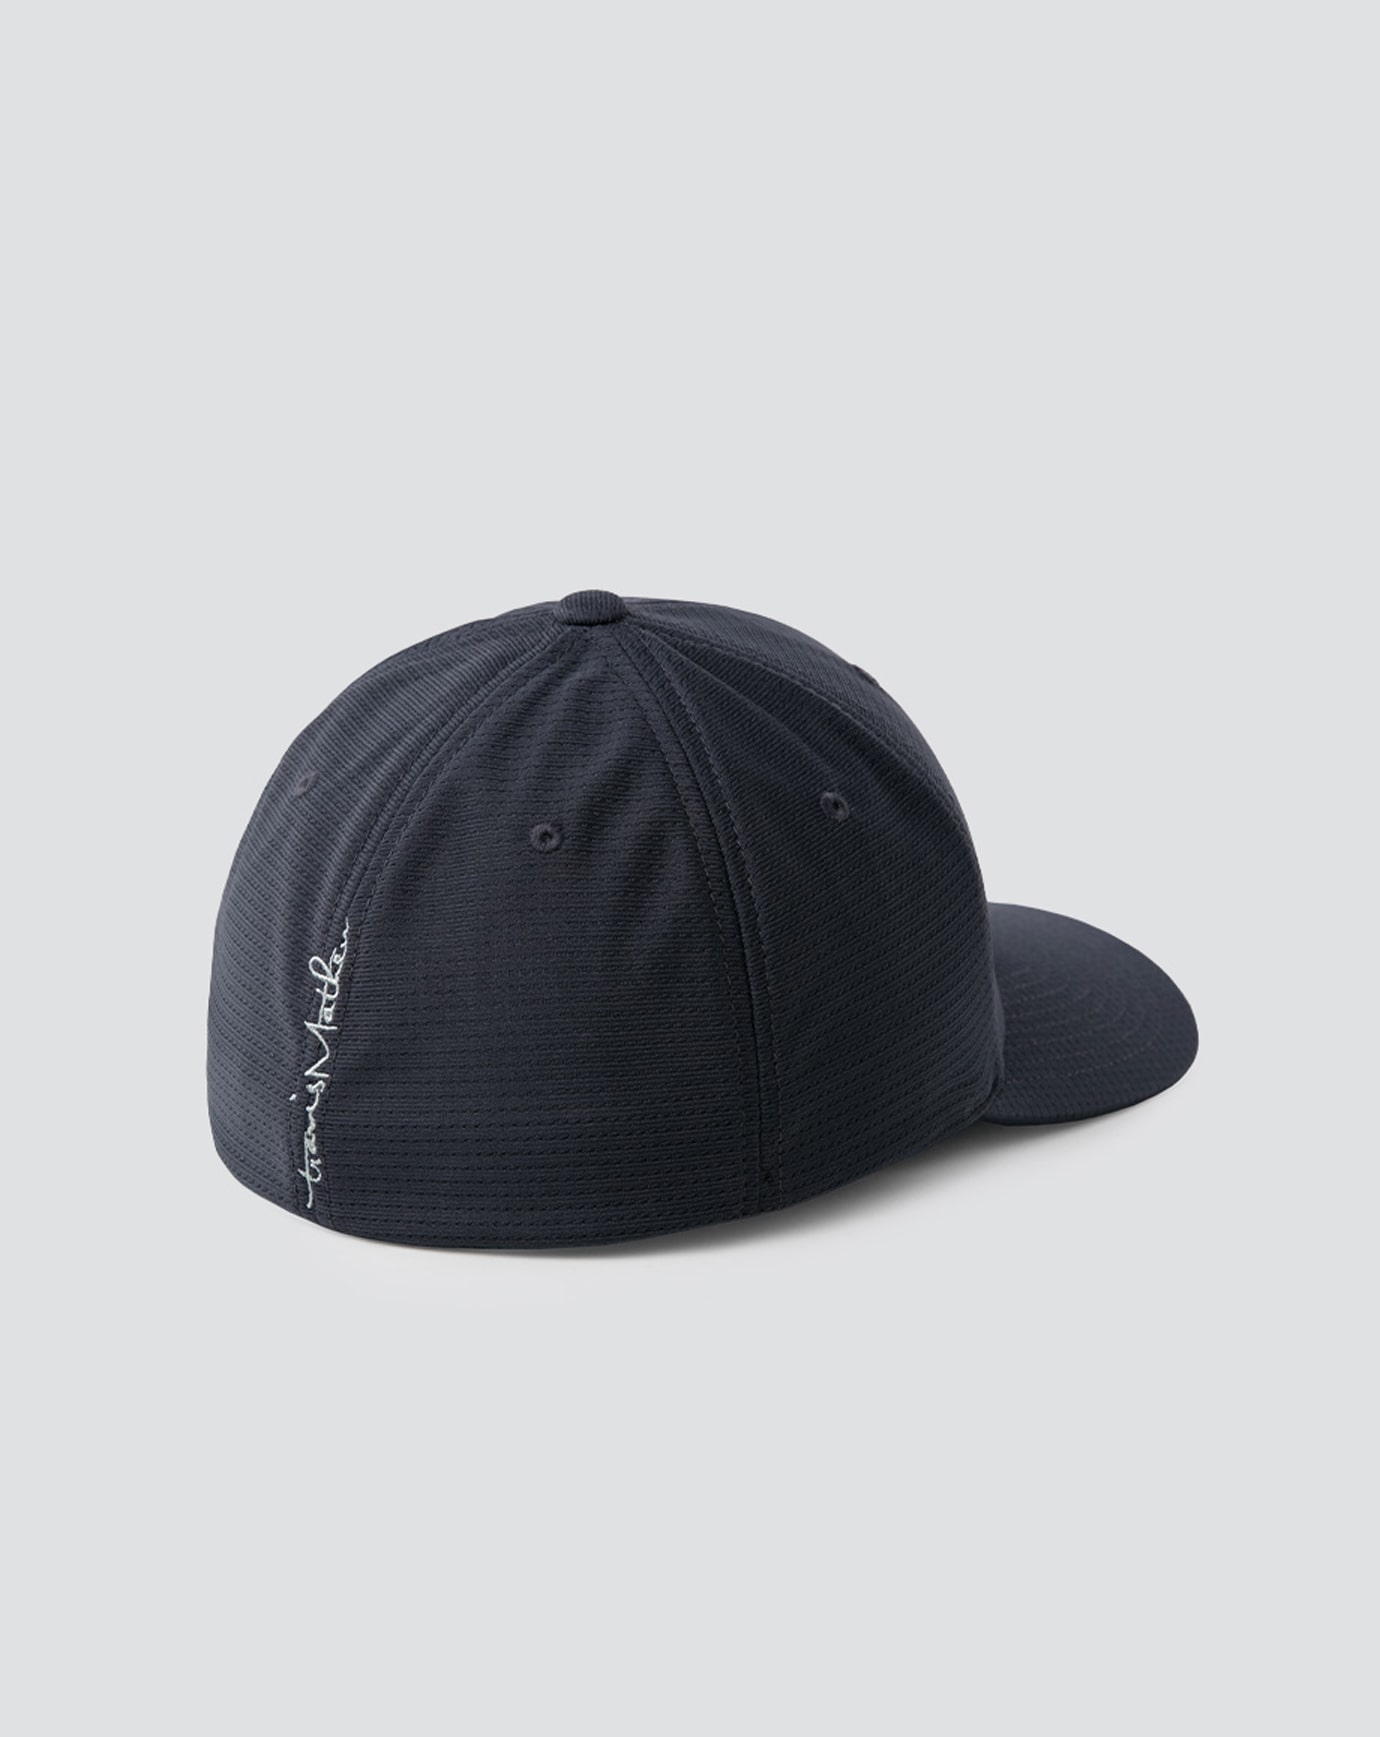 WONDER CITY FITTED HAT Image Thumbnail 3